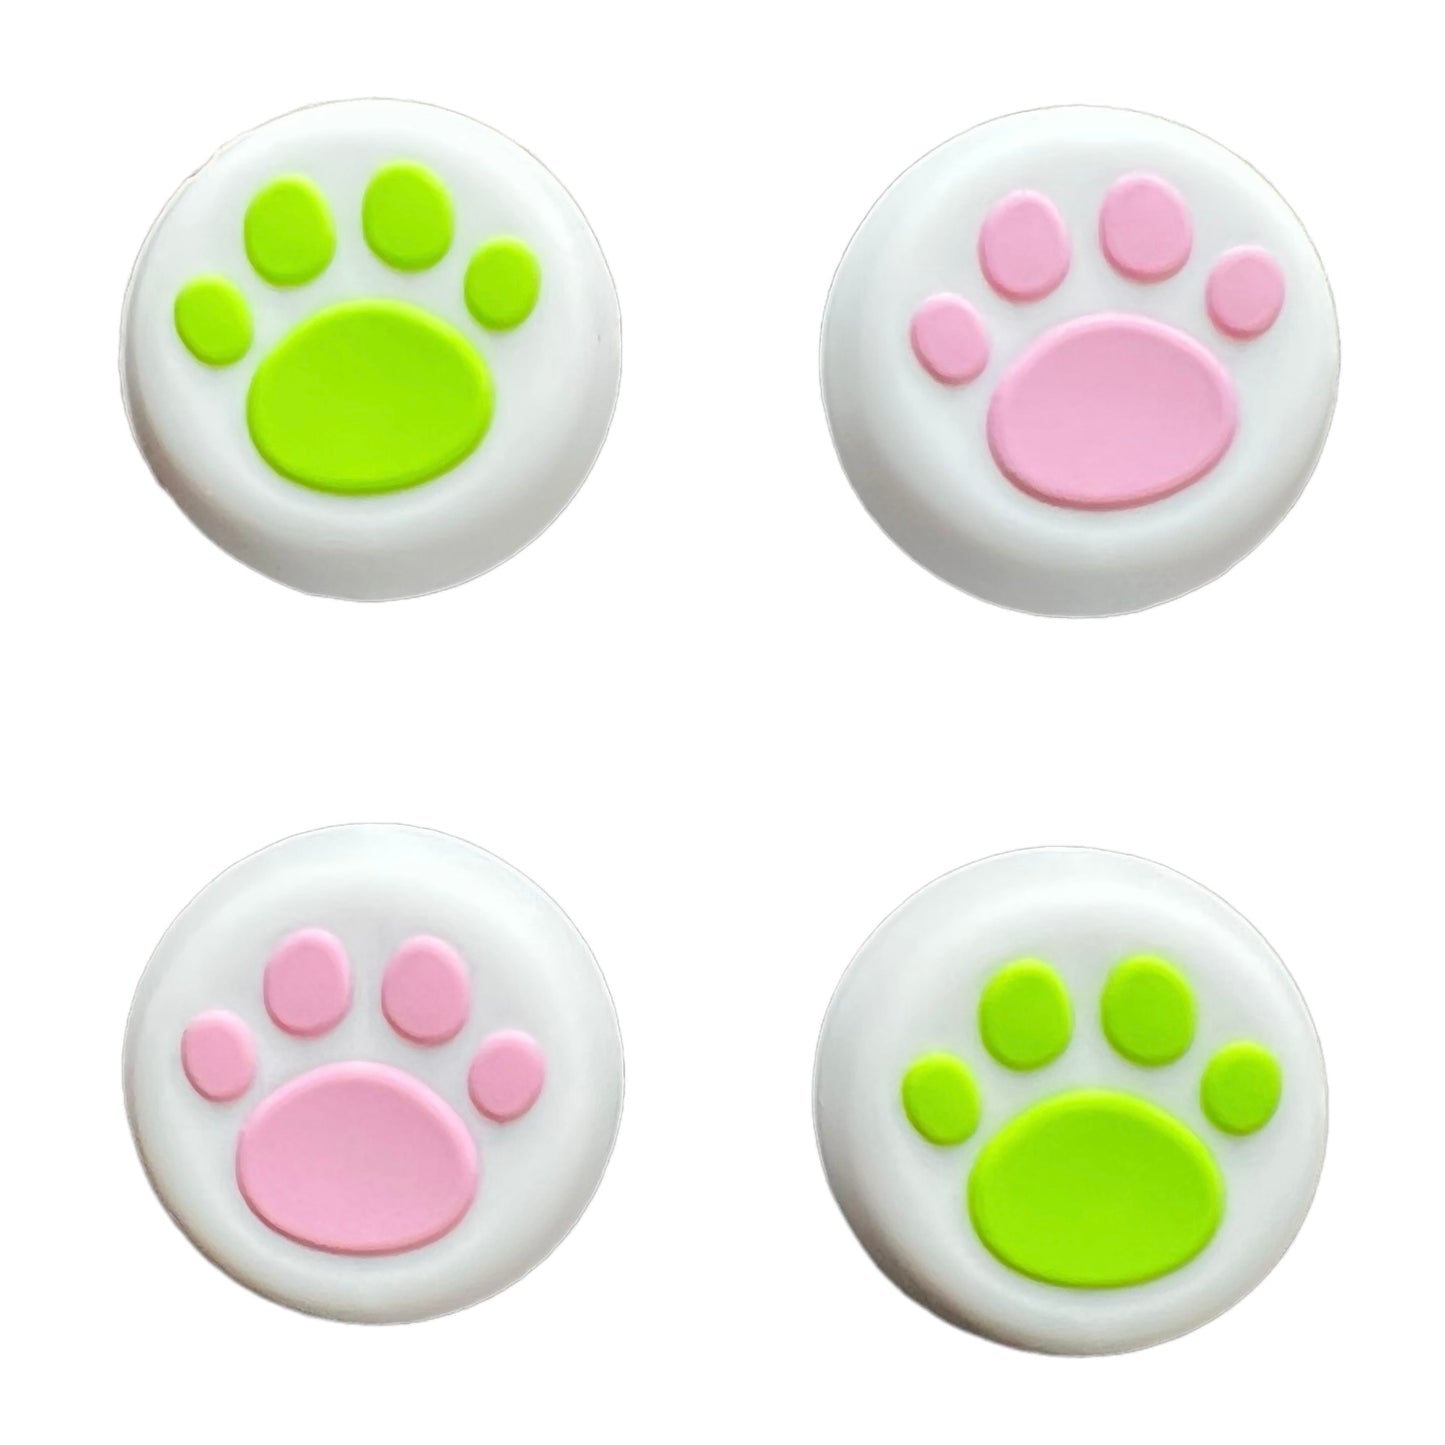 JenDore Pink Green White Paws 4Pcs Silicone Thumb Grip Caps for Nintendo Switch Pro, PS5, PS4, and Xbox 360 Controller